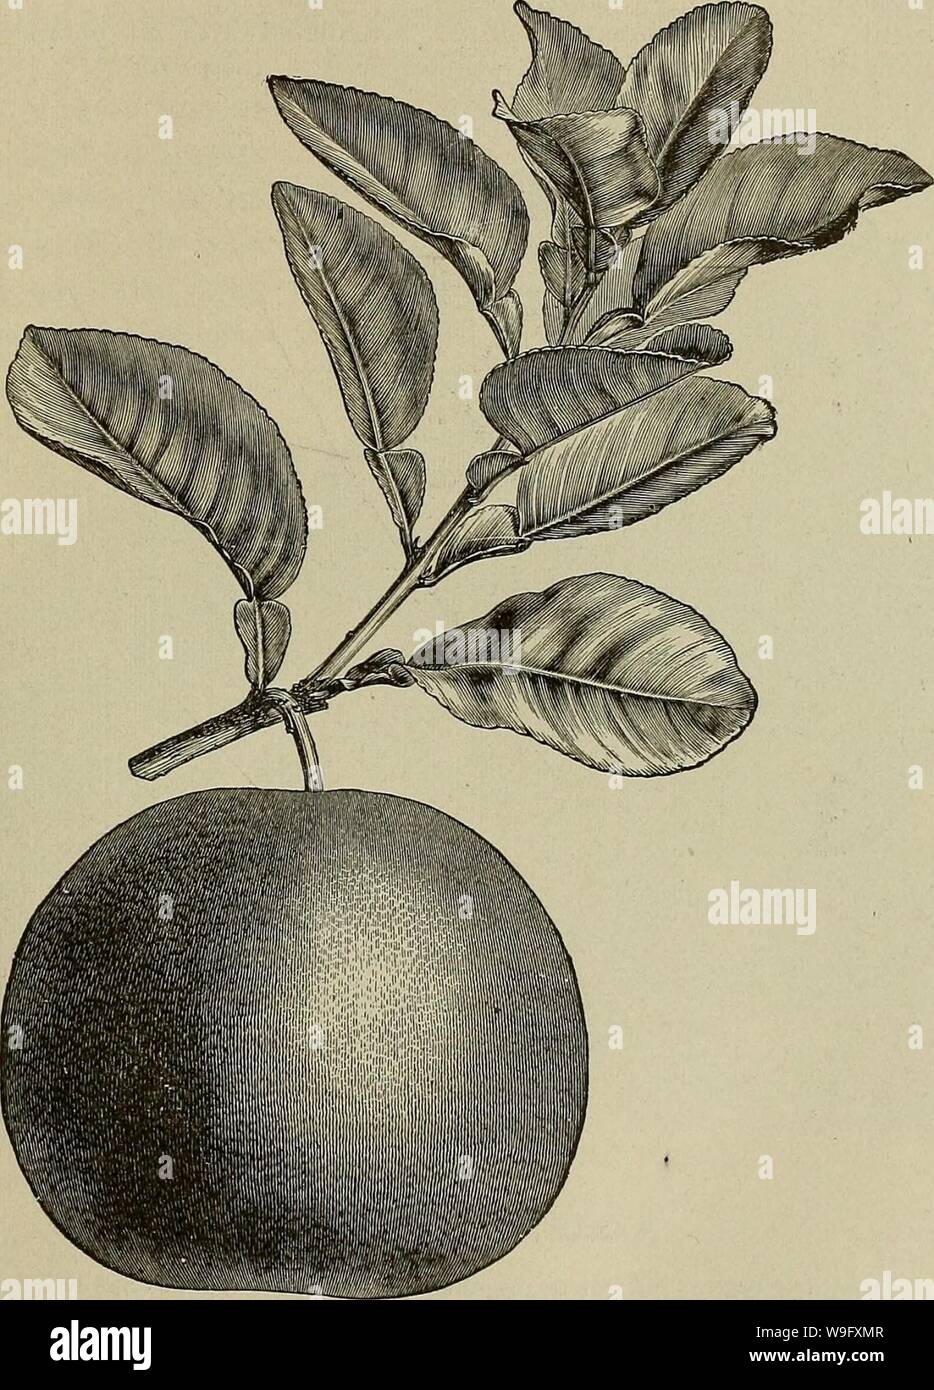 Archive image from page 80 of Culture of the citrus in. Culture of the citrus in California  cultureofcitrusi00cali Year: 1900 ( THE ORANGE IN CALIFORNIA—VARIETIES. 73 THE SHADDOCK. Citrus aurantium, var. Decumana, Willd. SEEDLINGS.—Hypocotyl very short, subterranean. Cotyledons subterranean, and remaining in the seed till they decay, oblong- elliptic, obtuse, plano-convex, fleshy, sessile, and both directed to one side    Fruiting branch of Shaddock (Citrus decumana)—reduced. greenish-yellow above, yellowish beneath, somewhat falcate, 13 mm. long and 6 mm. wide. Stem, soon becoming woody, cov Stock Photo